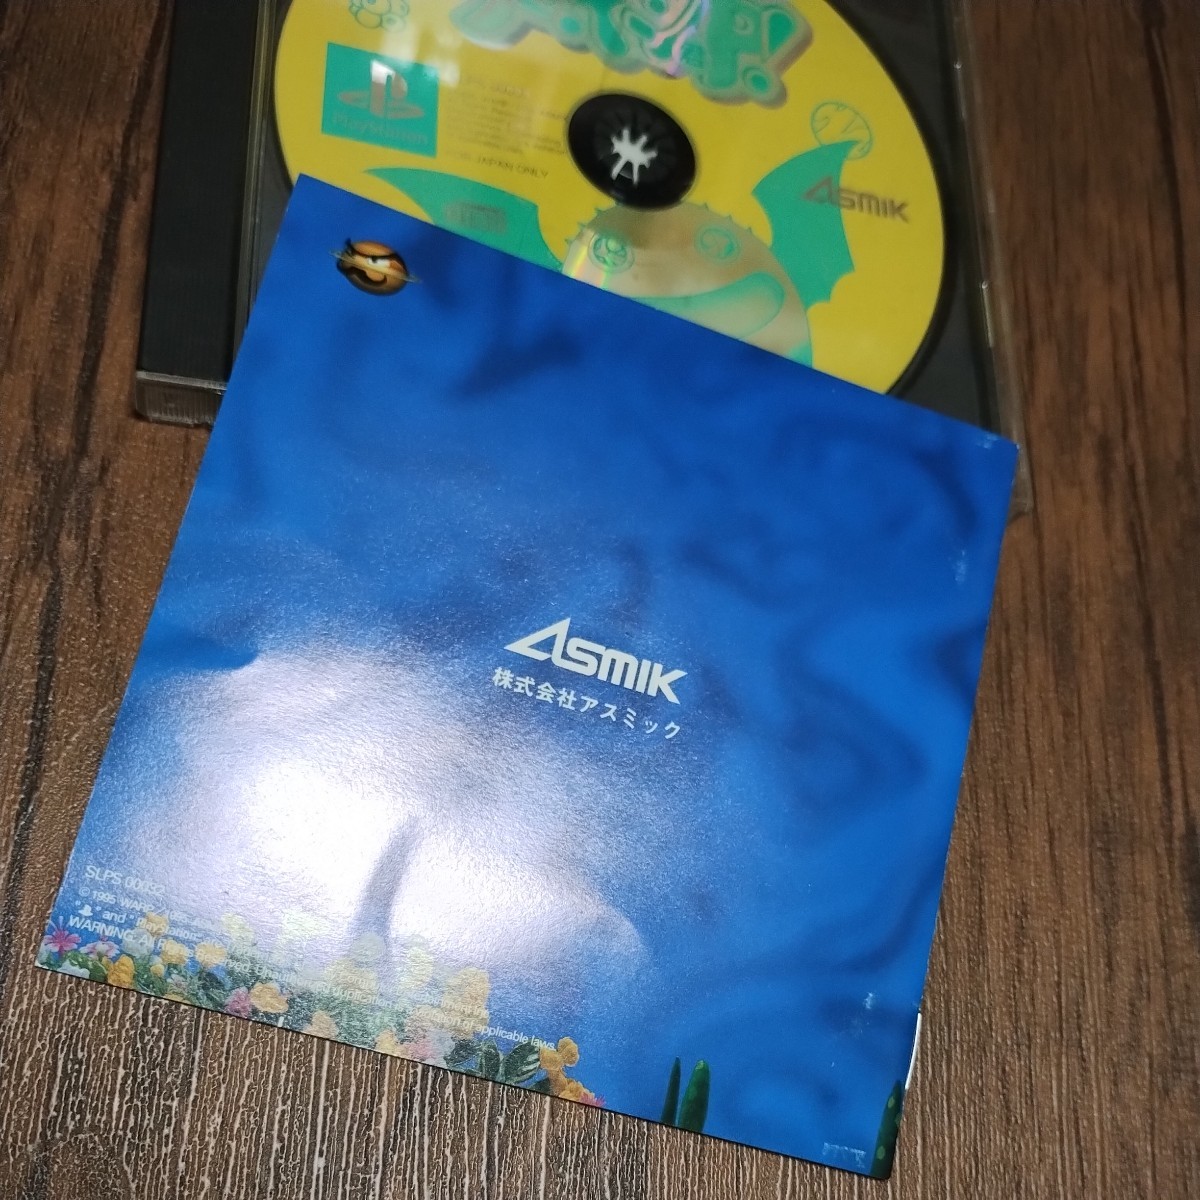 PlayStation PlayStation PlayStation PS1 PS soft used cosmos living thing fropon.P puzzle game asmik tube e